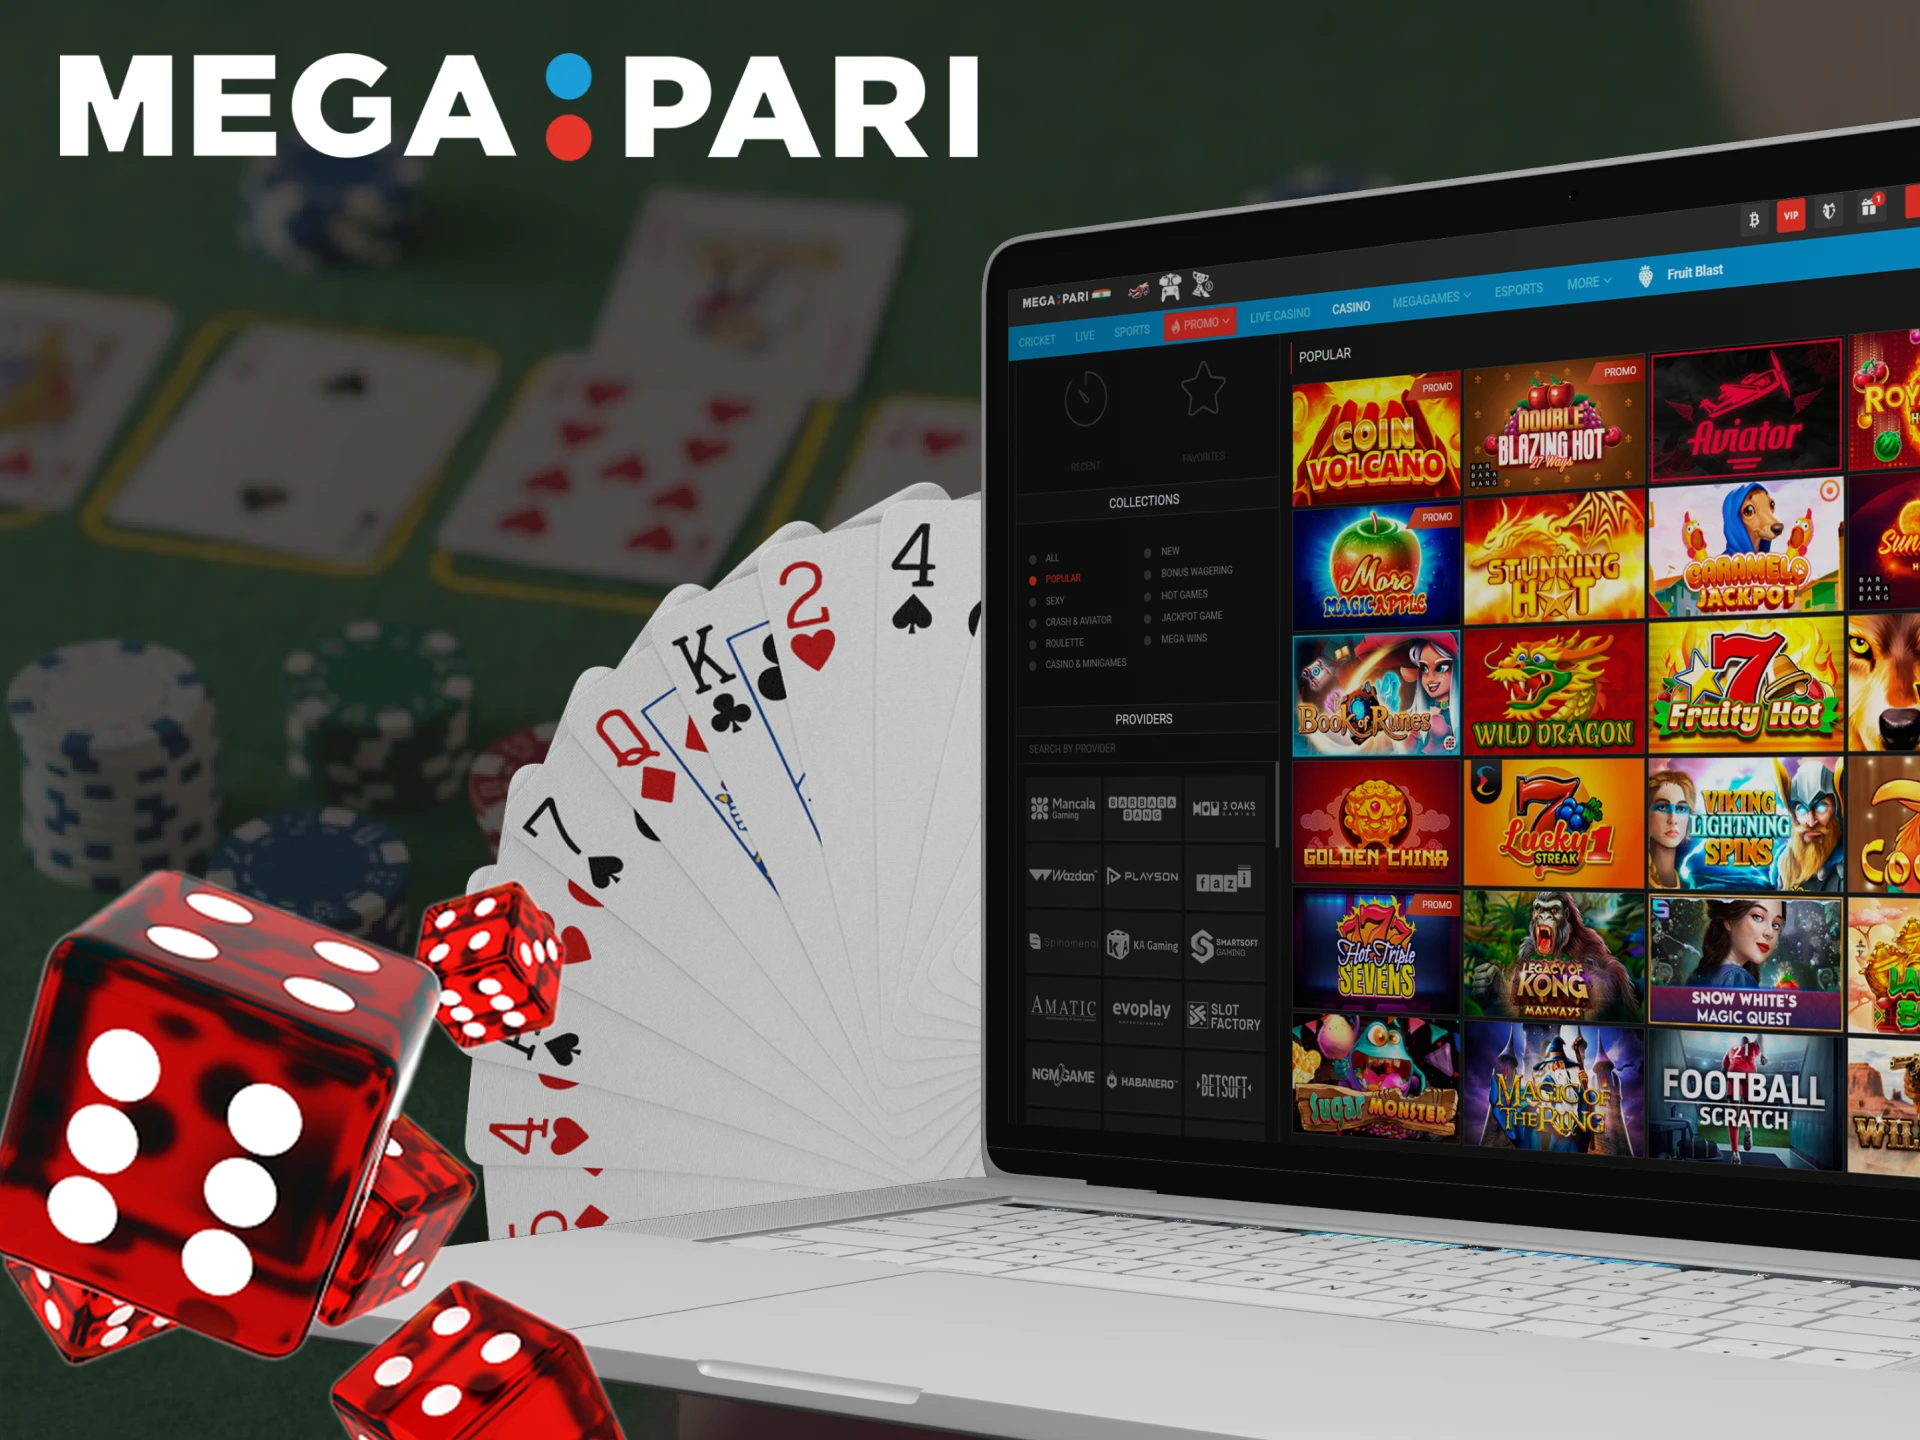 Check out the list of popular games offered at the Megapari online casino, which will appeal to all gambling fans.